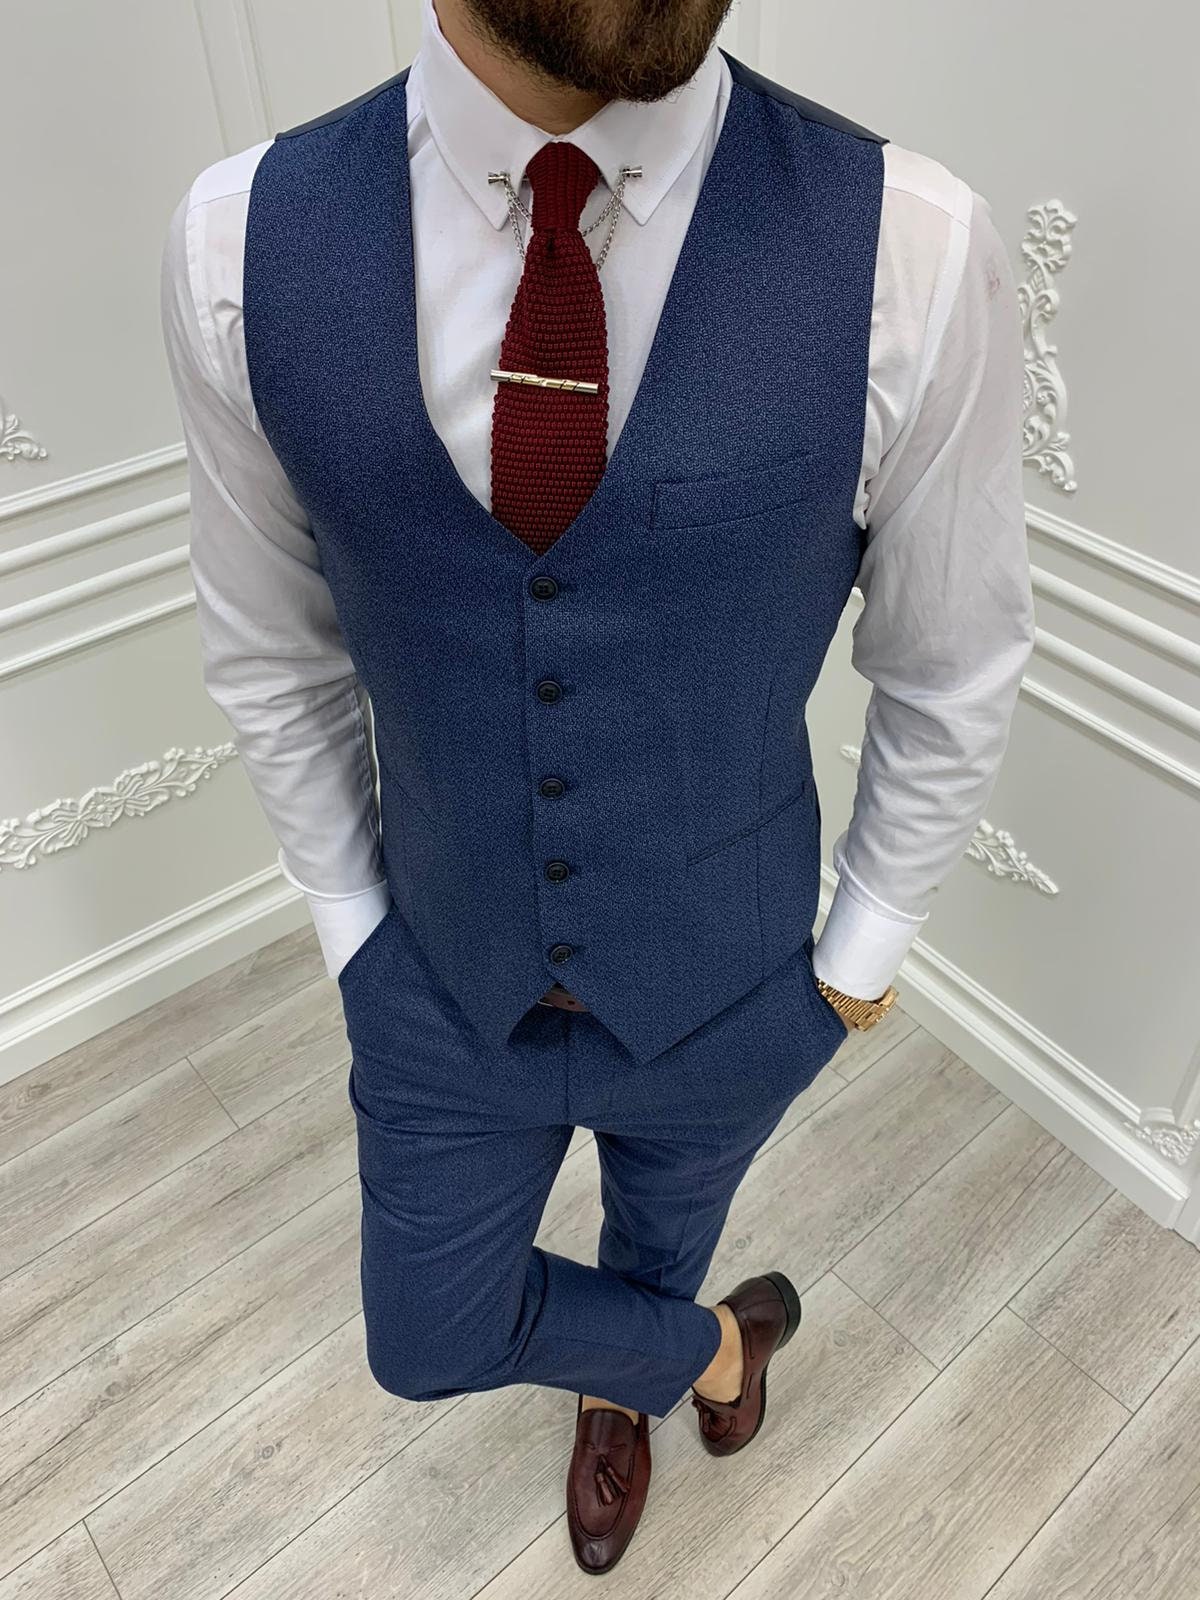 Men Suits Blue 3 Piece Slim Fit Two Button Wedding Groom Party | Etsy